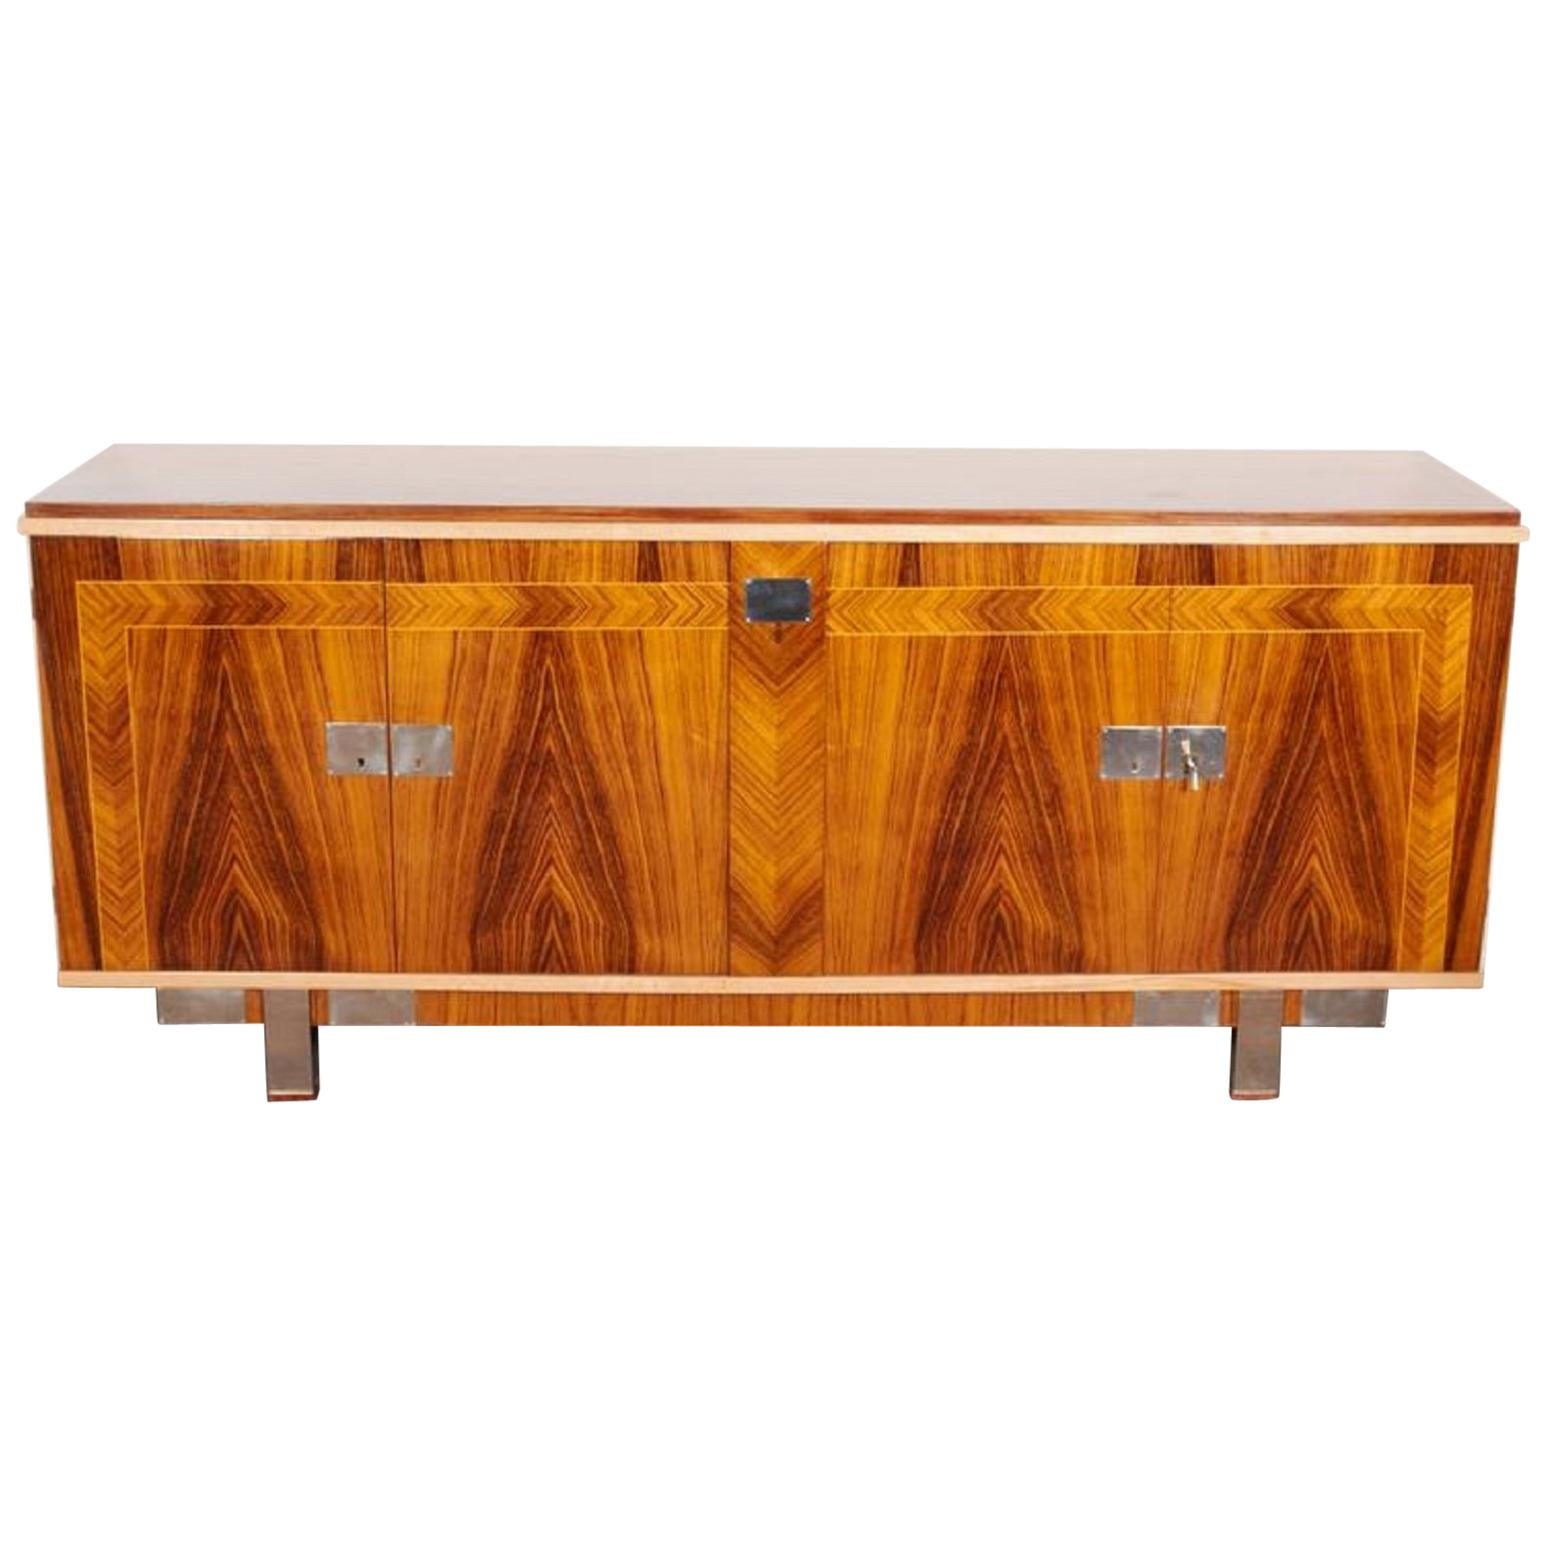 French Mid-Century Modern Palisander Cabinet with Blonde and Nickeled Accents